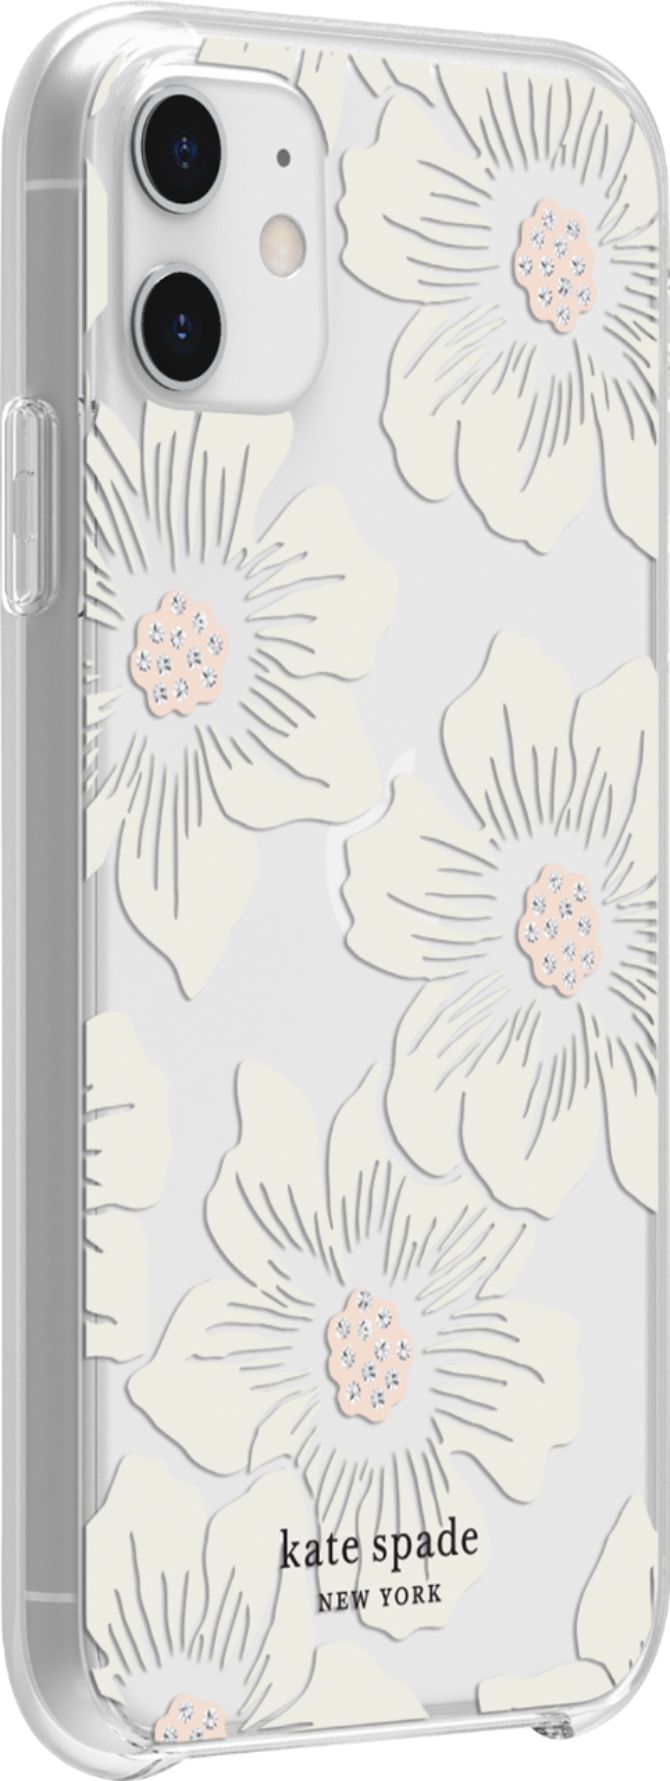 Angle View: kate spade new york - Protective Hard Shell Case for Apple® iPhone® 11 - Cream With Stones/Hollyhock Floral Clear